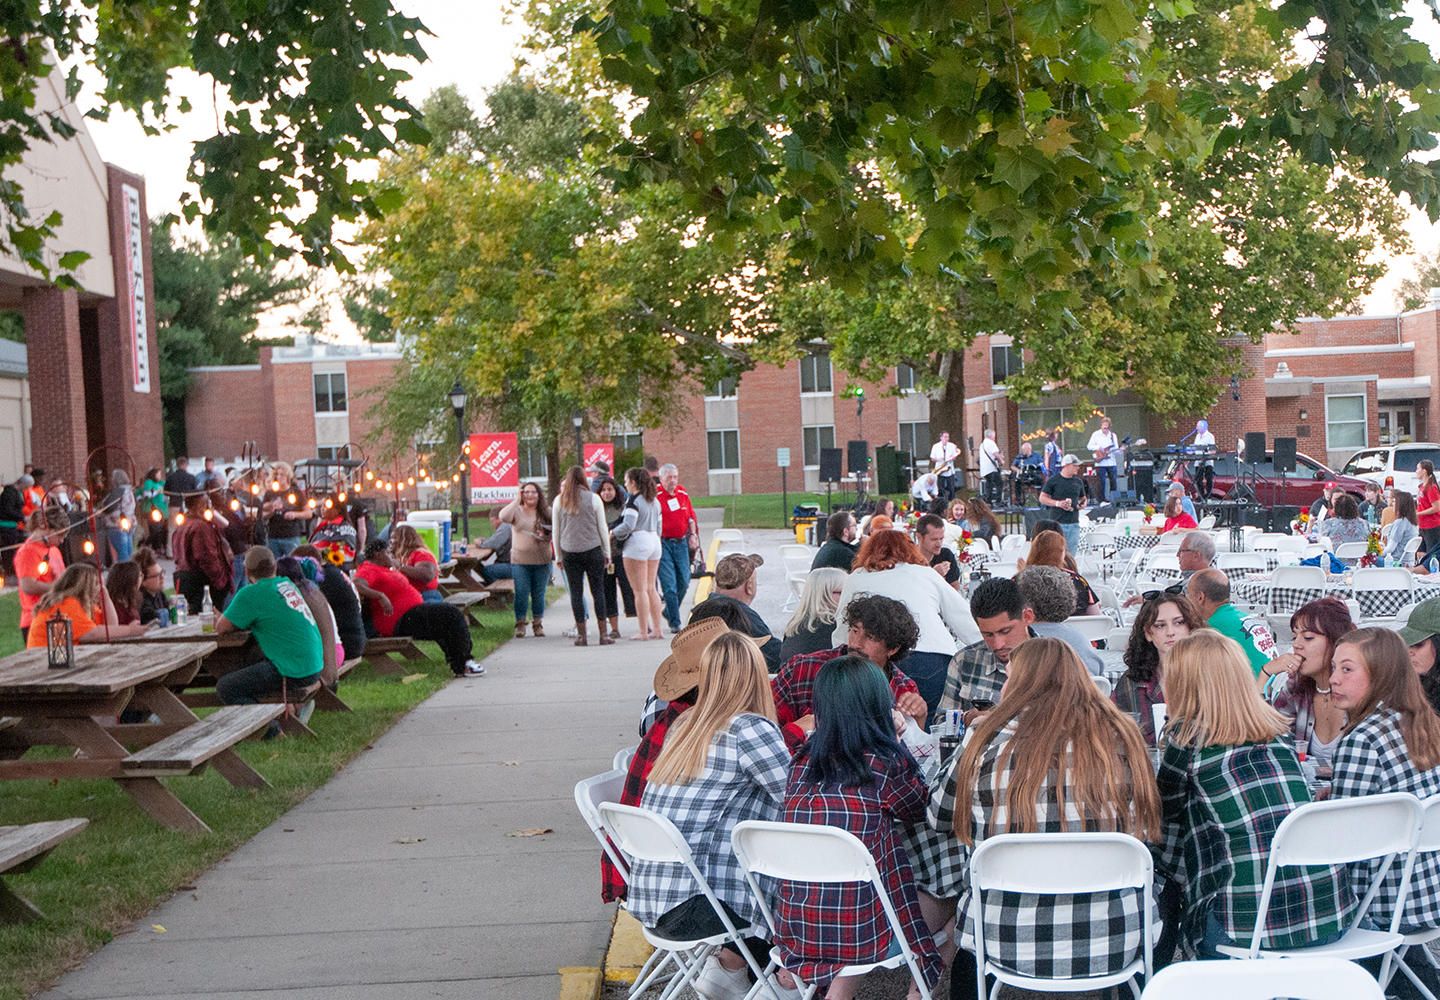 Wide shot of the crowd in front of the Demuzio Campus Center during the 2022 Homecoming festivities.